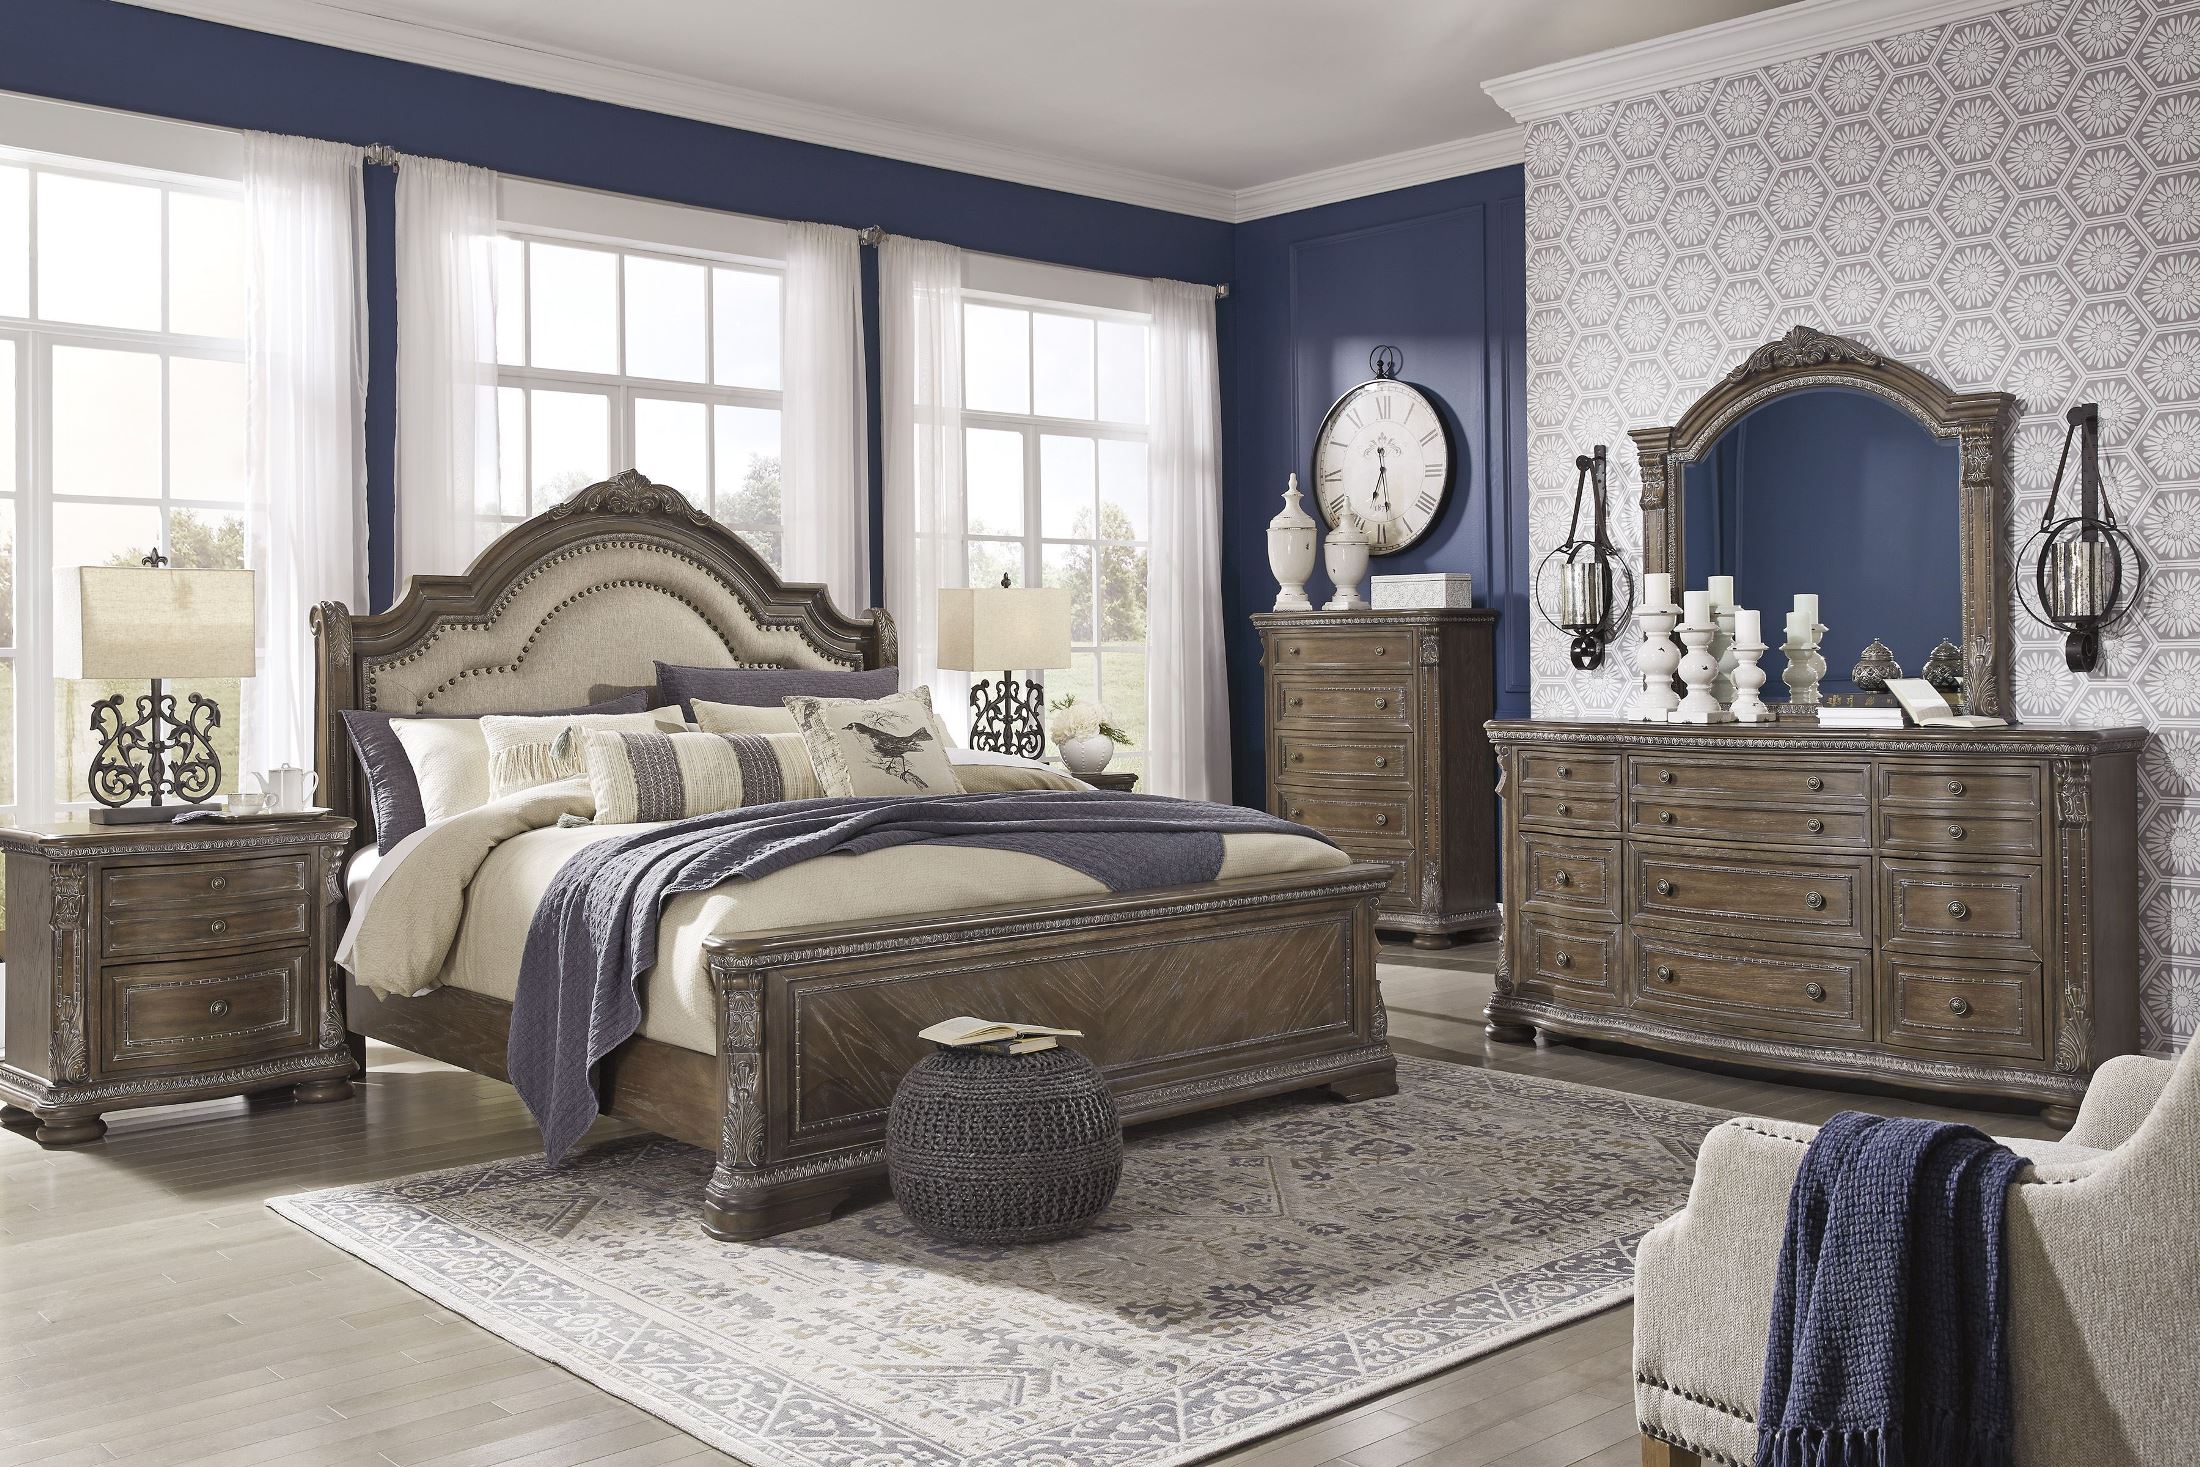 Louis Philippe II Cherry Cal.King Sleigh Bed - Shop for Affordable Home  Furniture, Decor, Outdoors and more